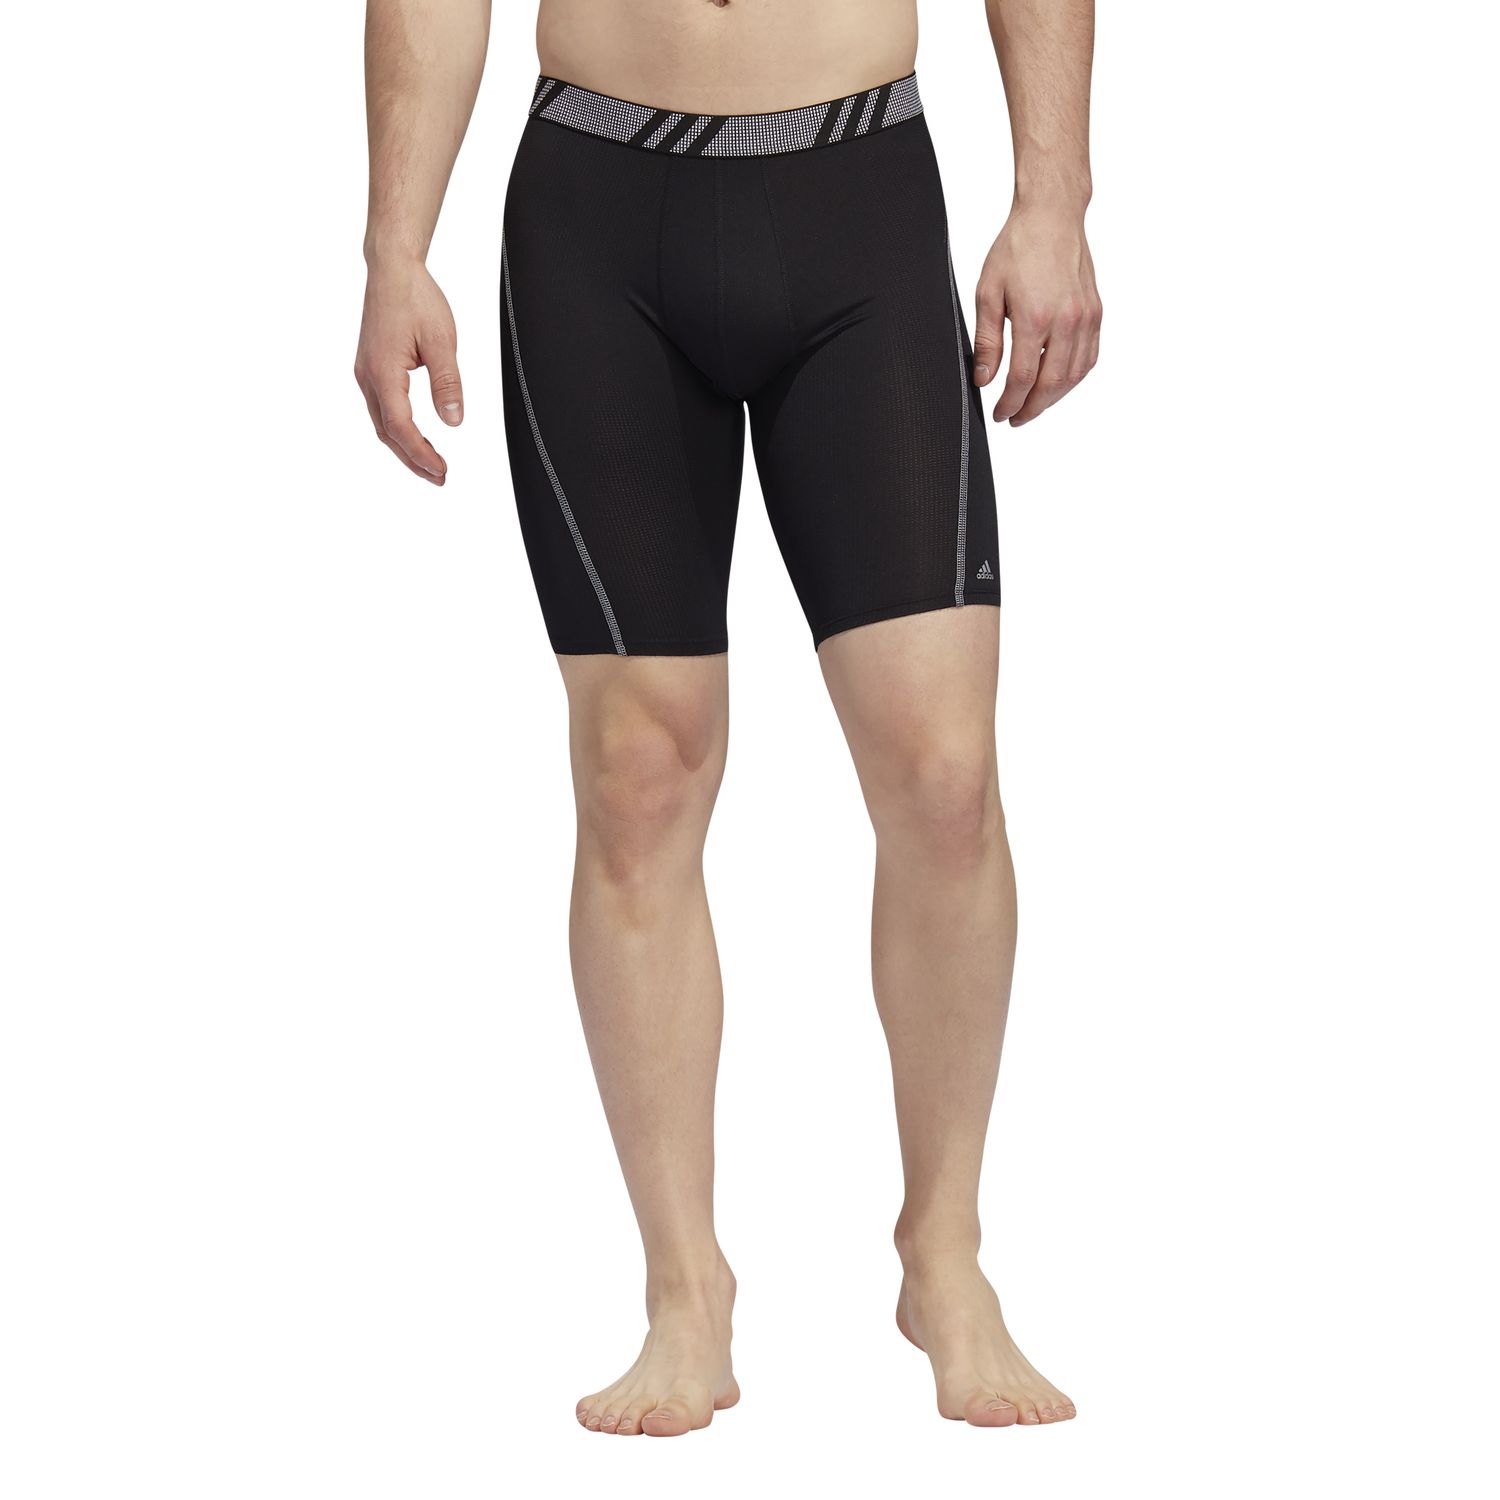 adidas men's climacool 7 midway briefs online